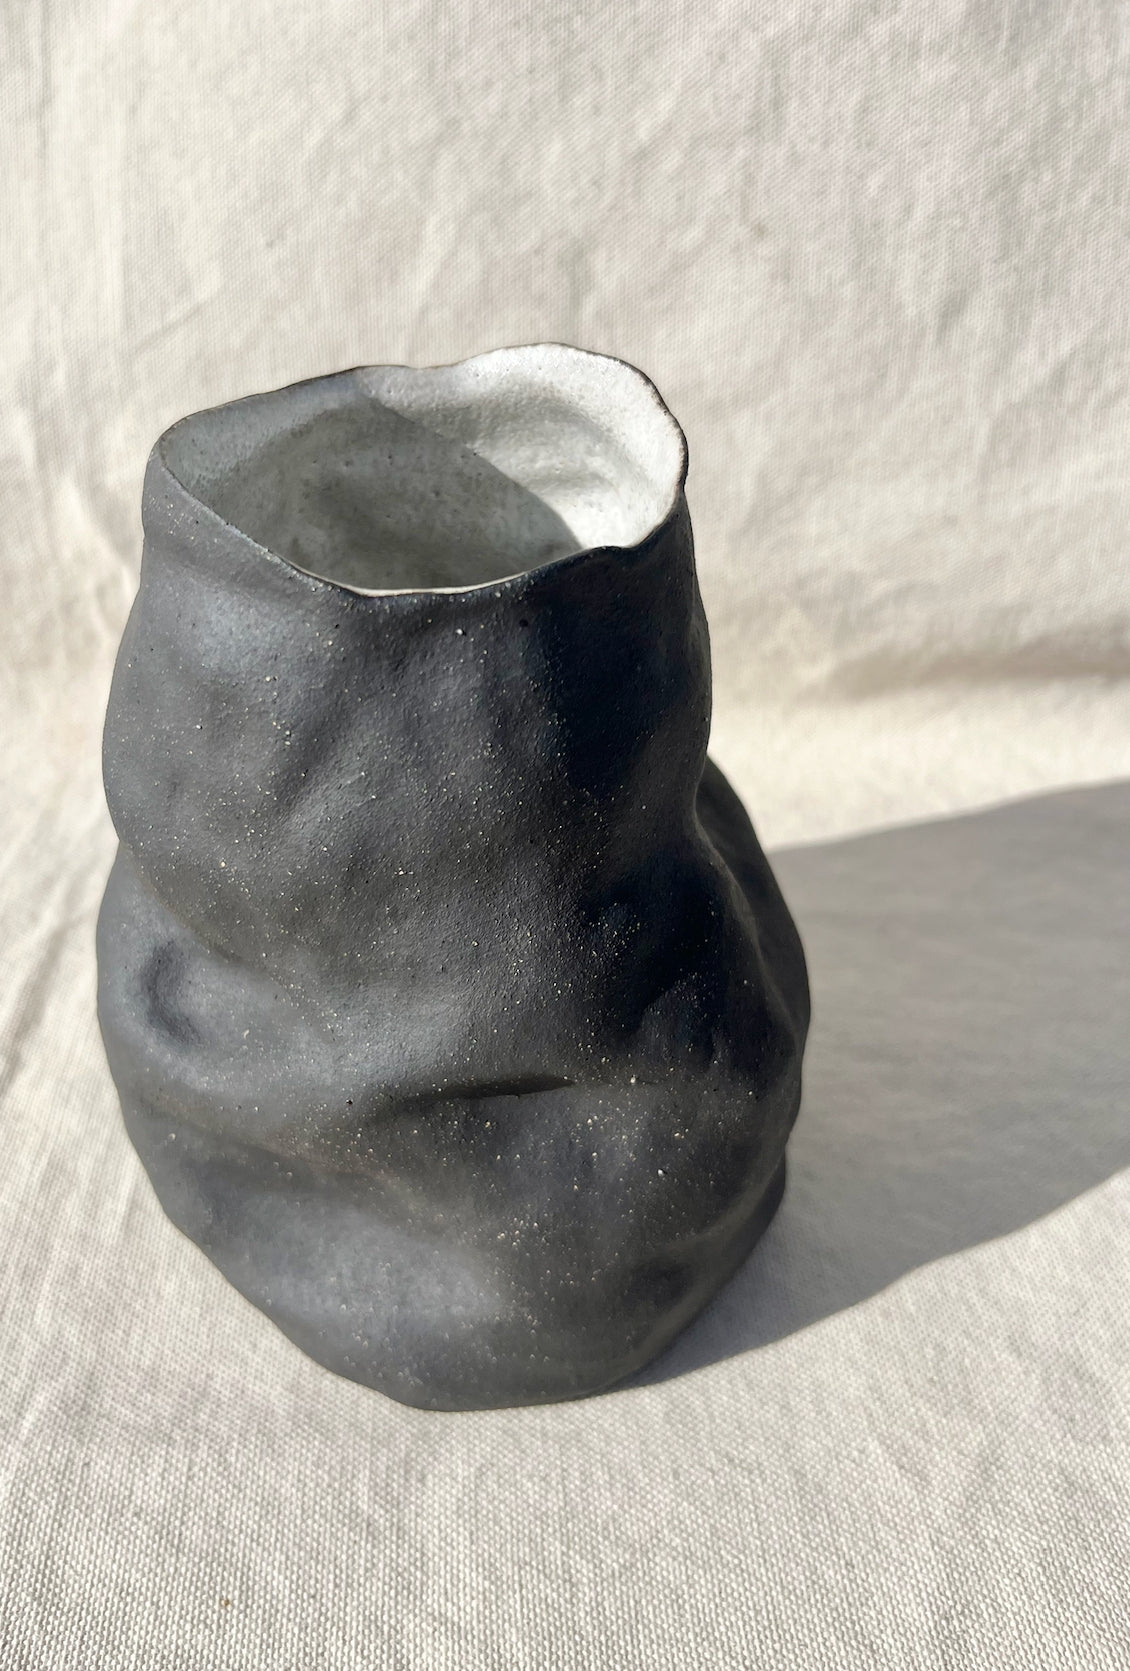 Organic vase with a black and white speckled clay body and white inside glaze. Hand built, glazed and fired in Slo, Ca.